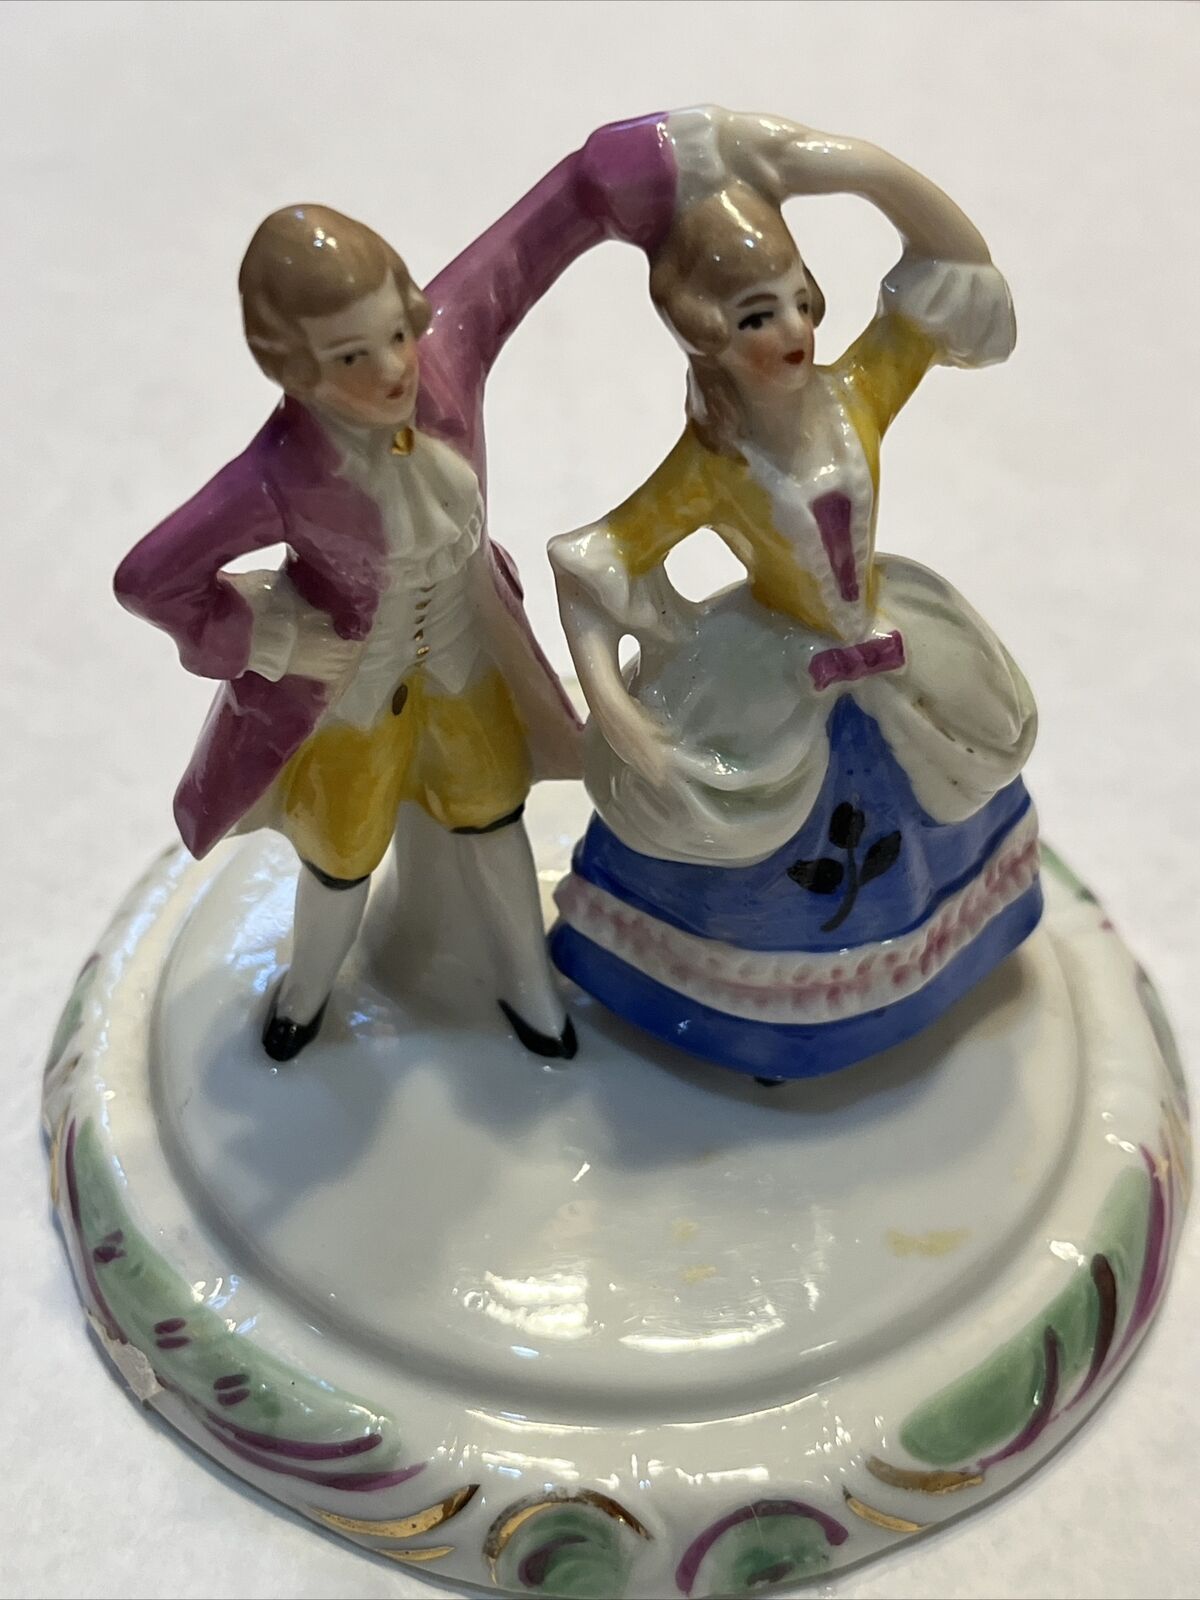 Antique Gafenthal Dancing Couple Figurine Statue Germany